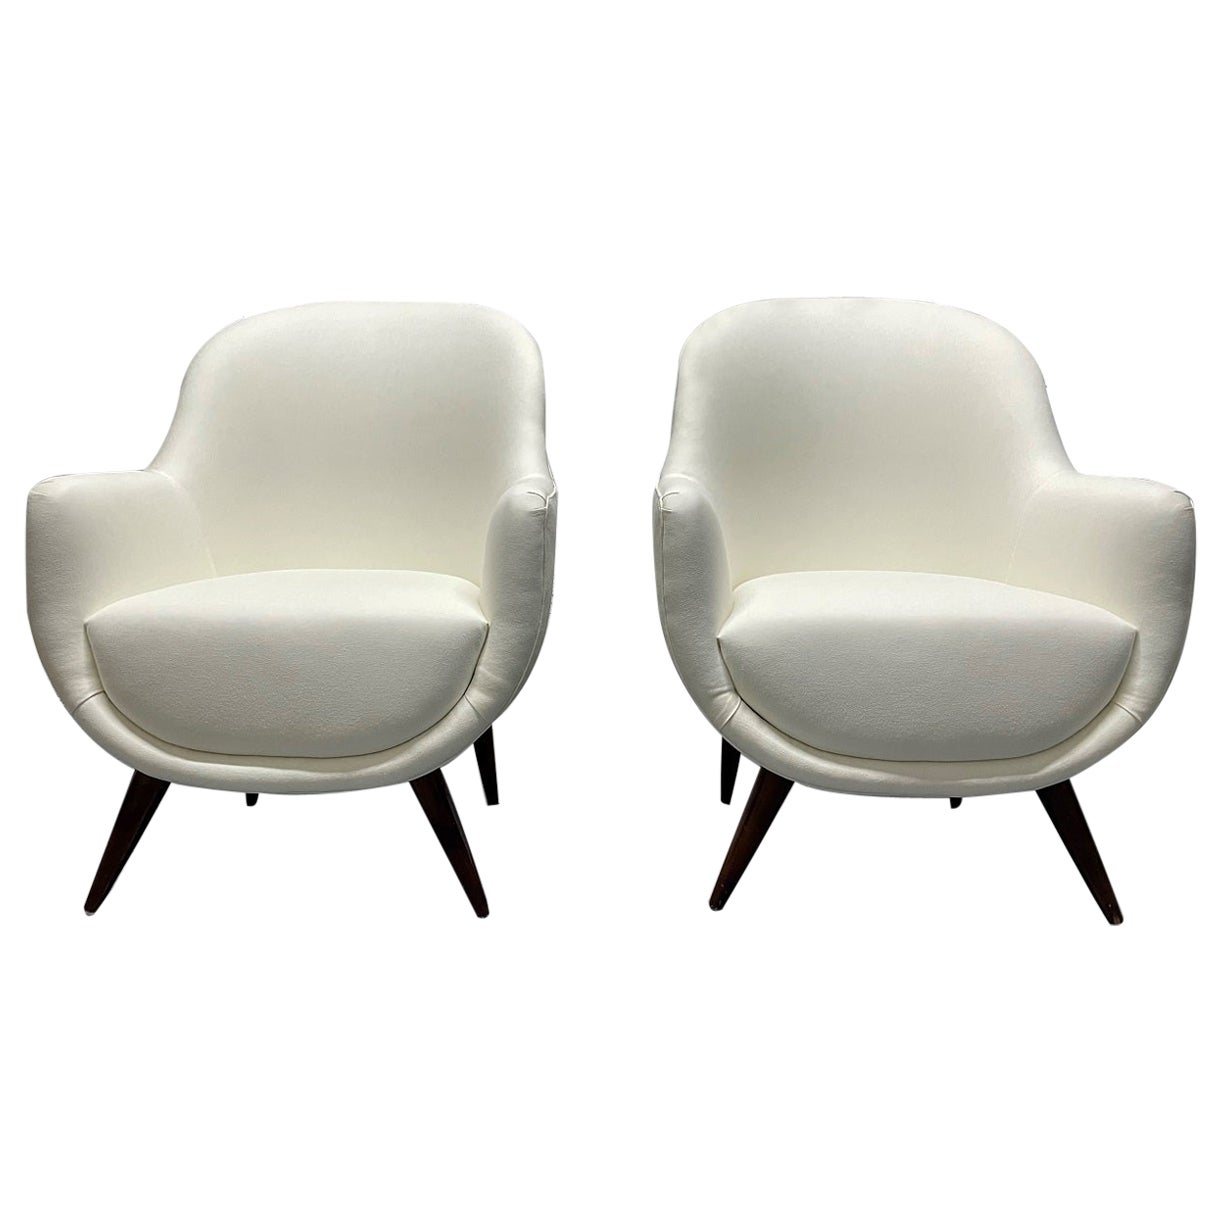 Pair of Italian Style Lounge Chairs